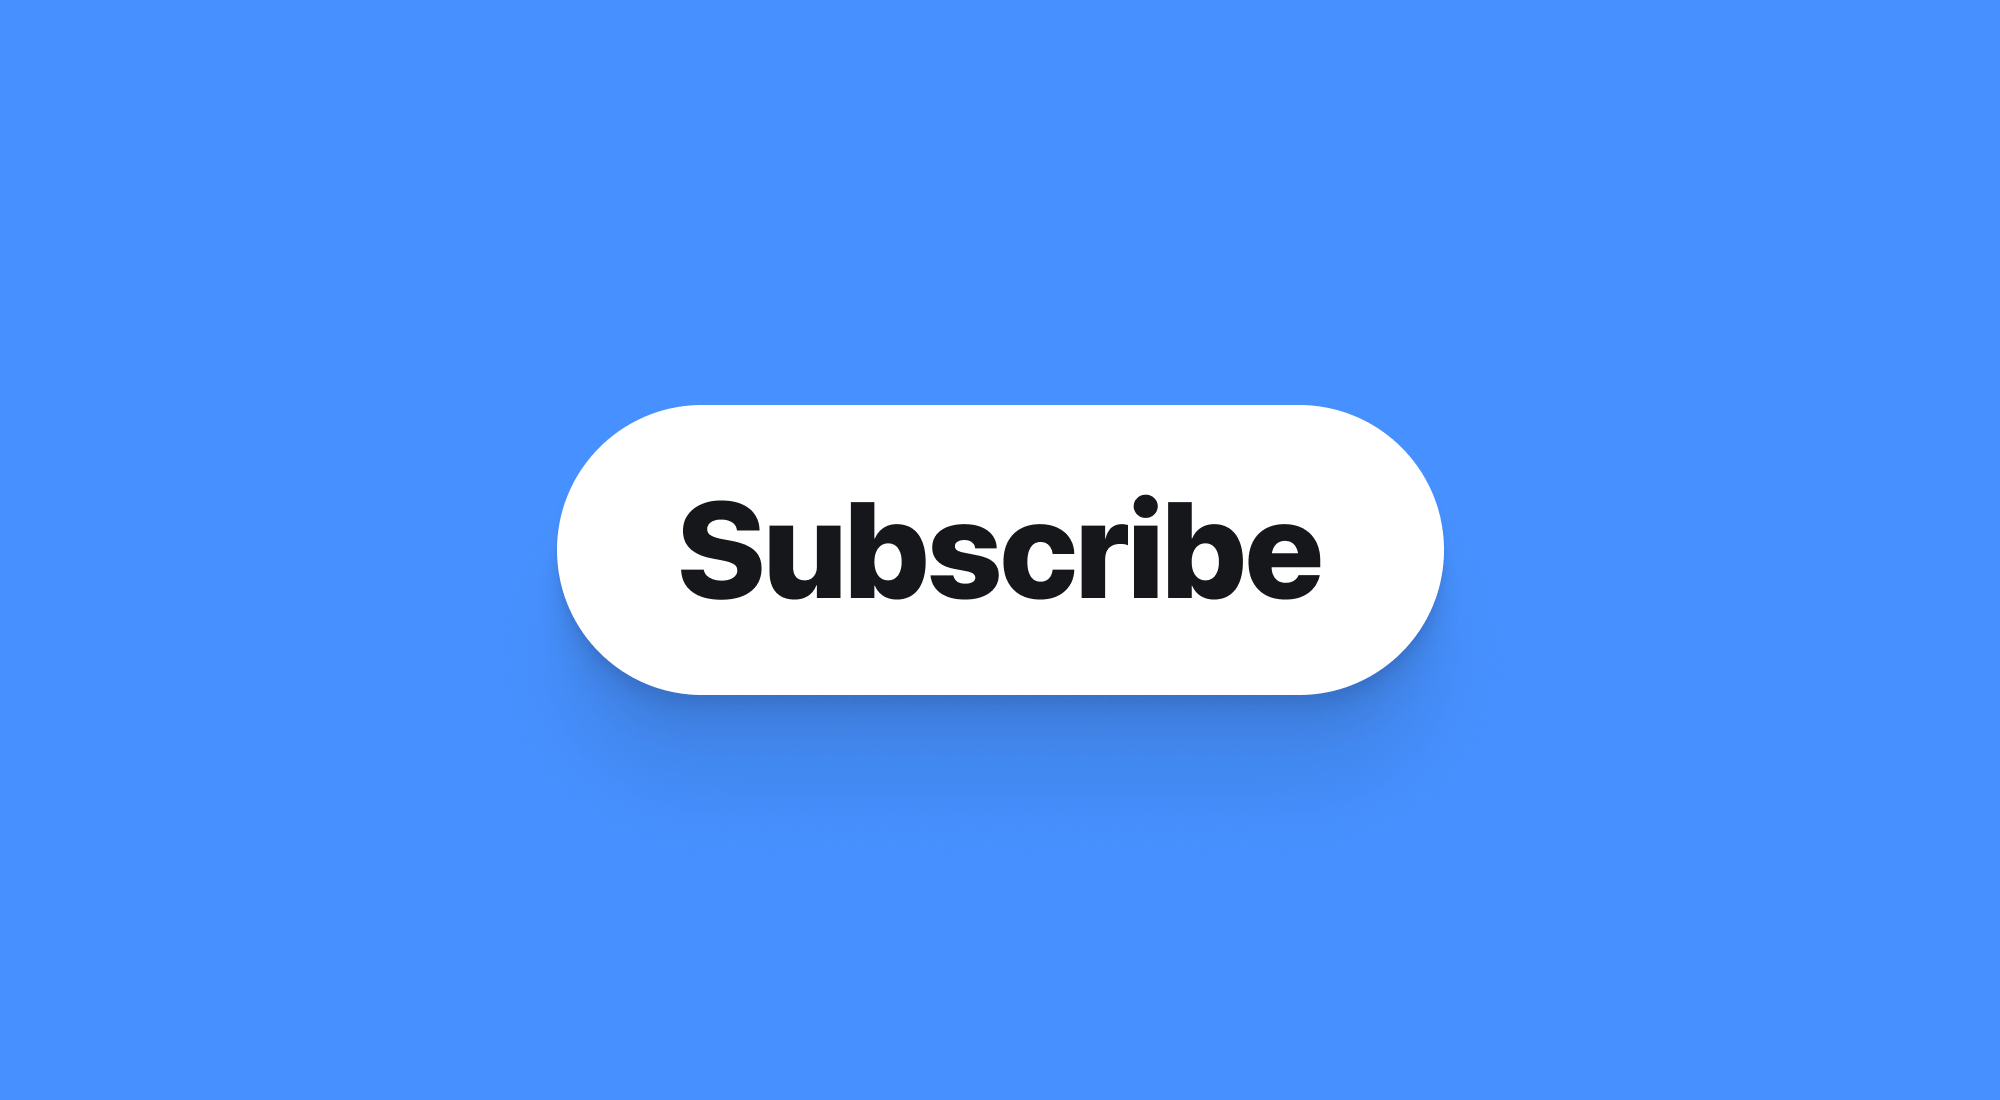 Building your audience with subscriber signups